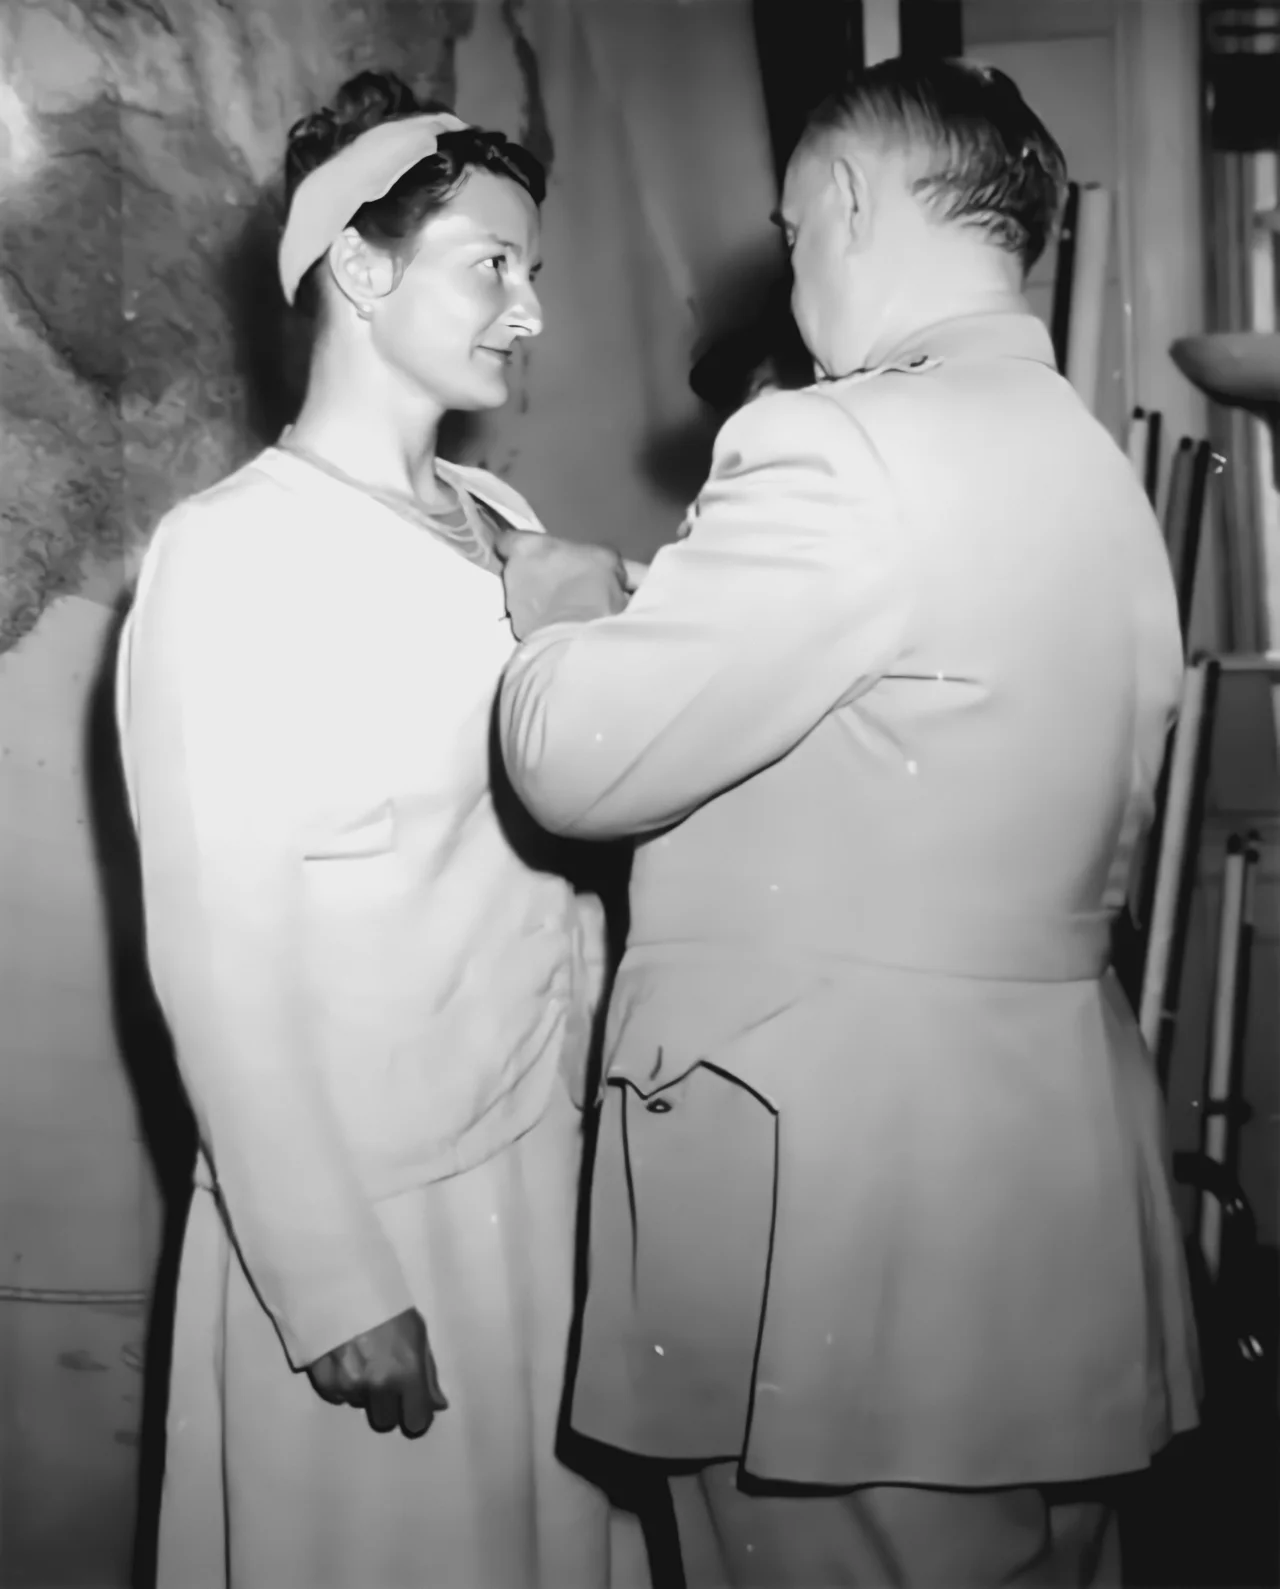 Virginia Hall receiving the Distinguished Service Cross in 1945 from OSS chief General Donovan